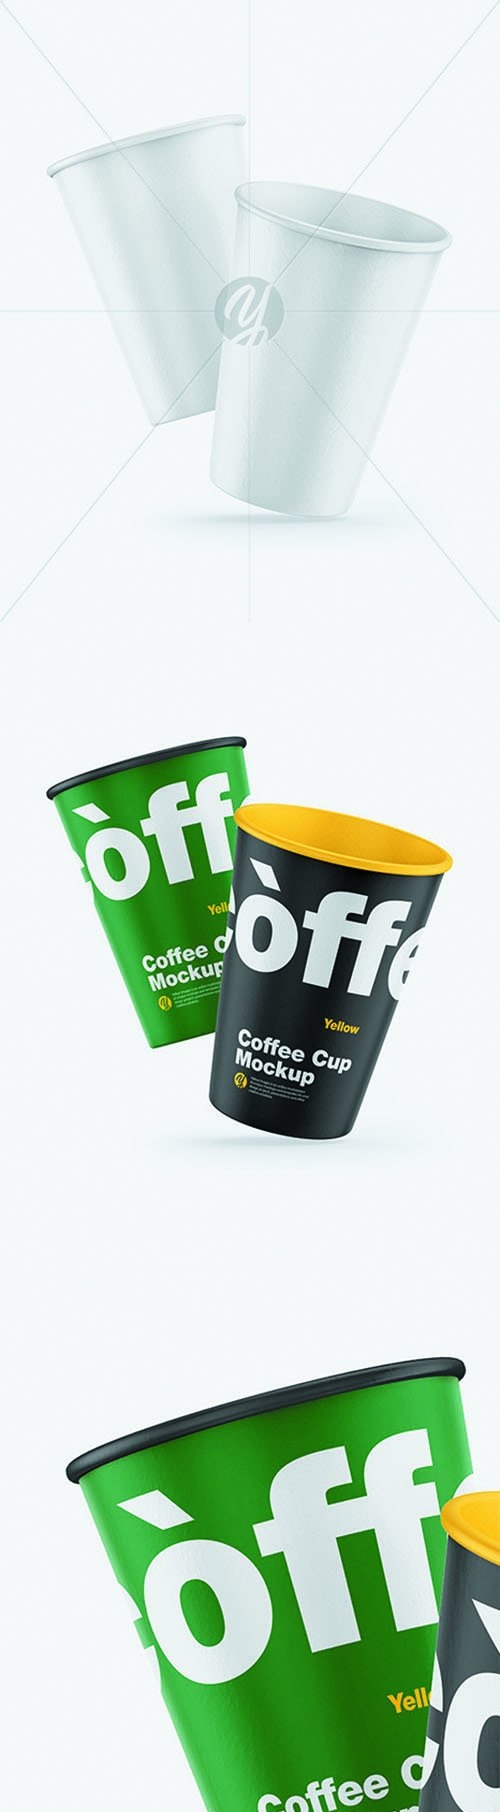 Paper Coffee Cup Mockup 66040